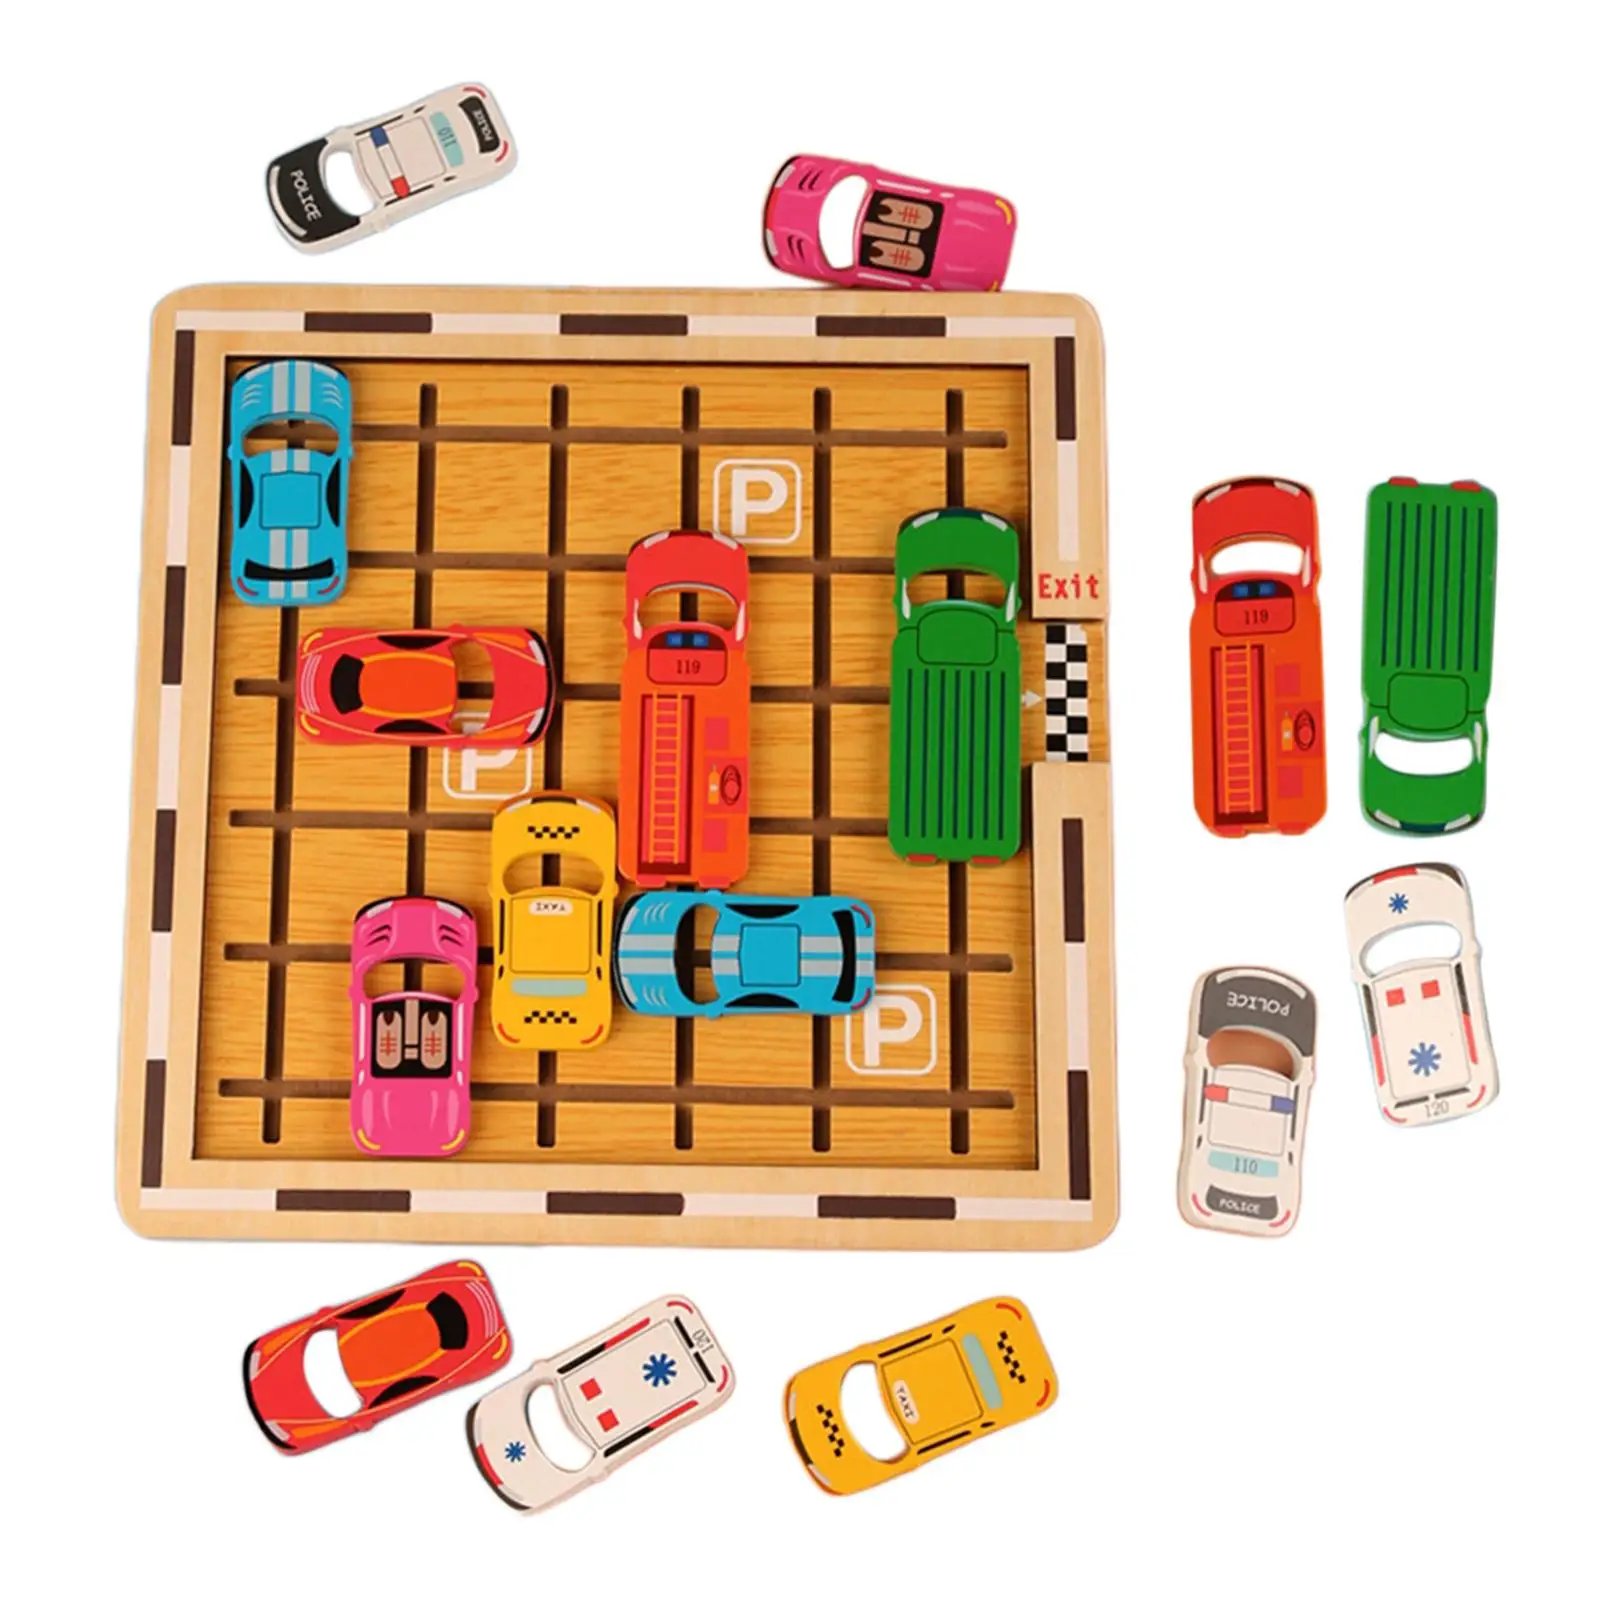 Wooden Early Education Car Logical Thinking Training Exercise Brain Ability Sensory Toy Development for Toddlers Kids Boys Gifts